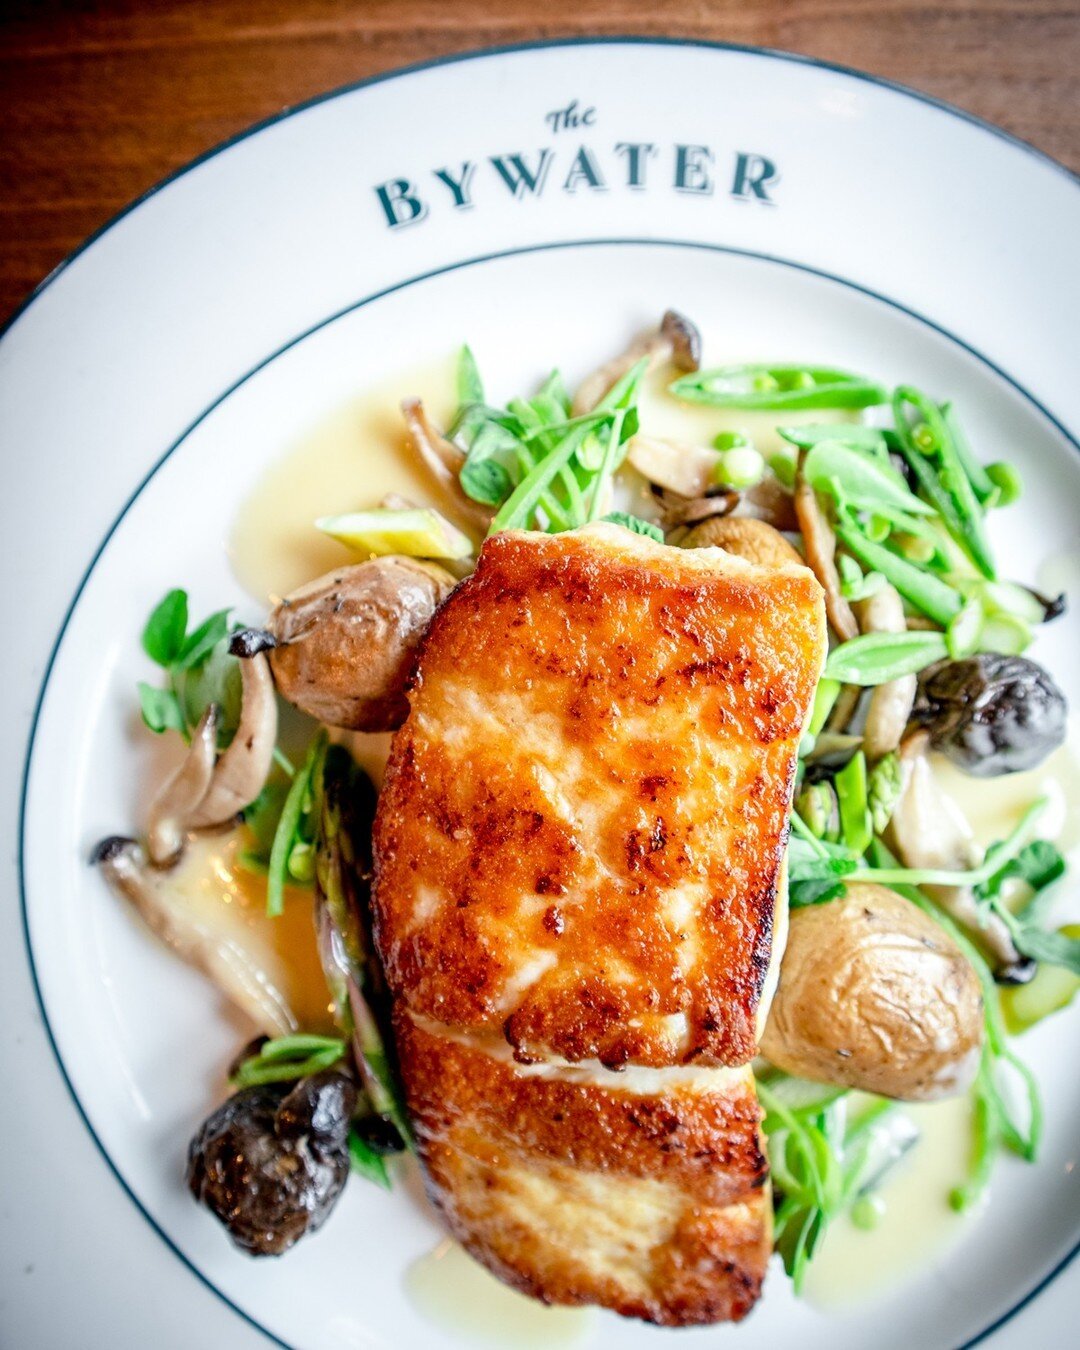 Treat Mom to a nice dinner at The Bywater this Sunday 💐 Specials for the night include &eacute;touf&eacute;e and scallops. Link in bio to make your reseration!